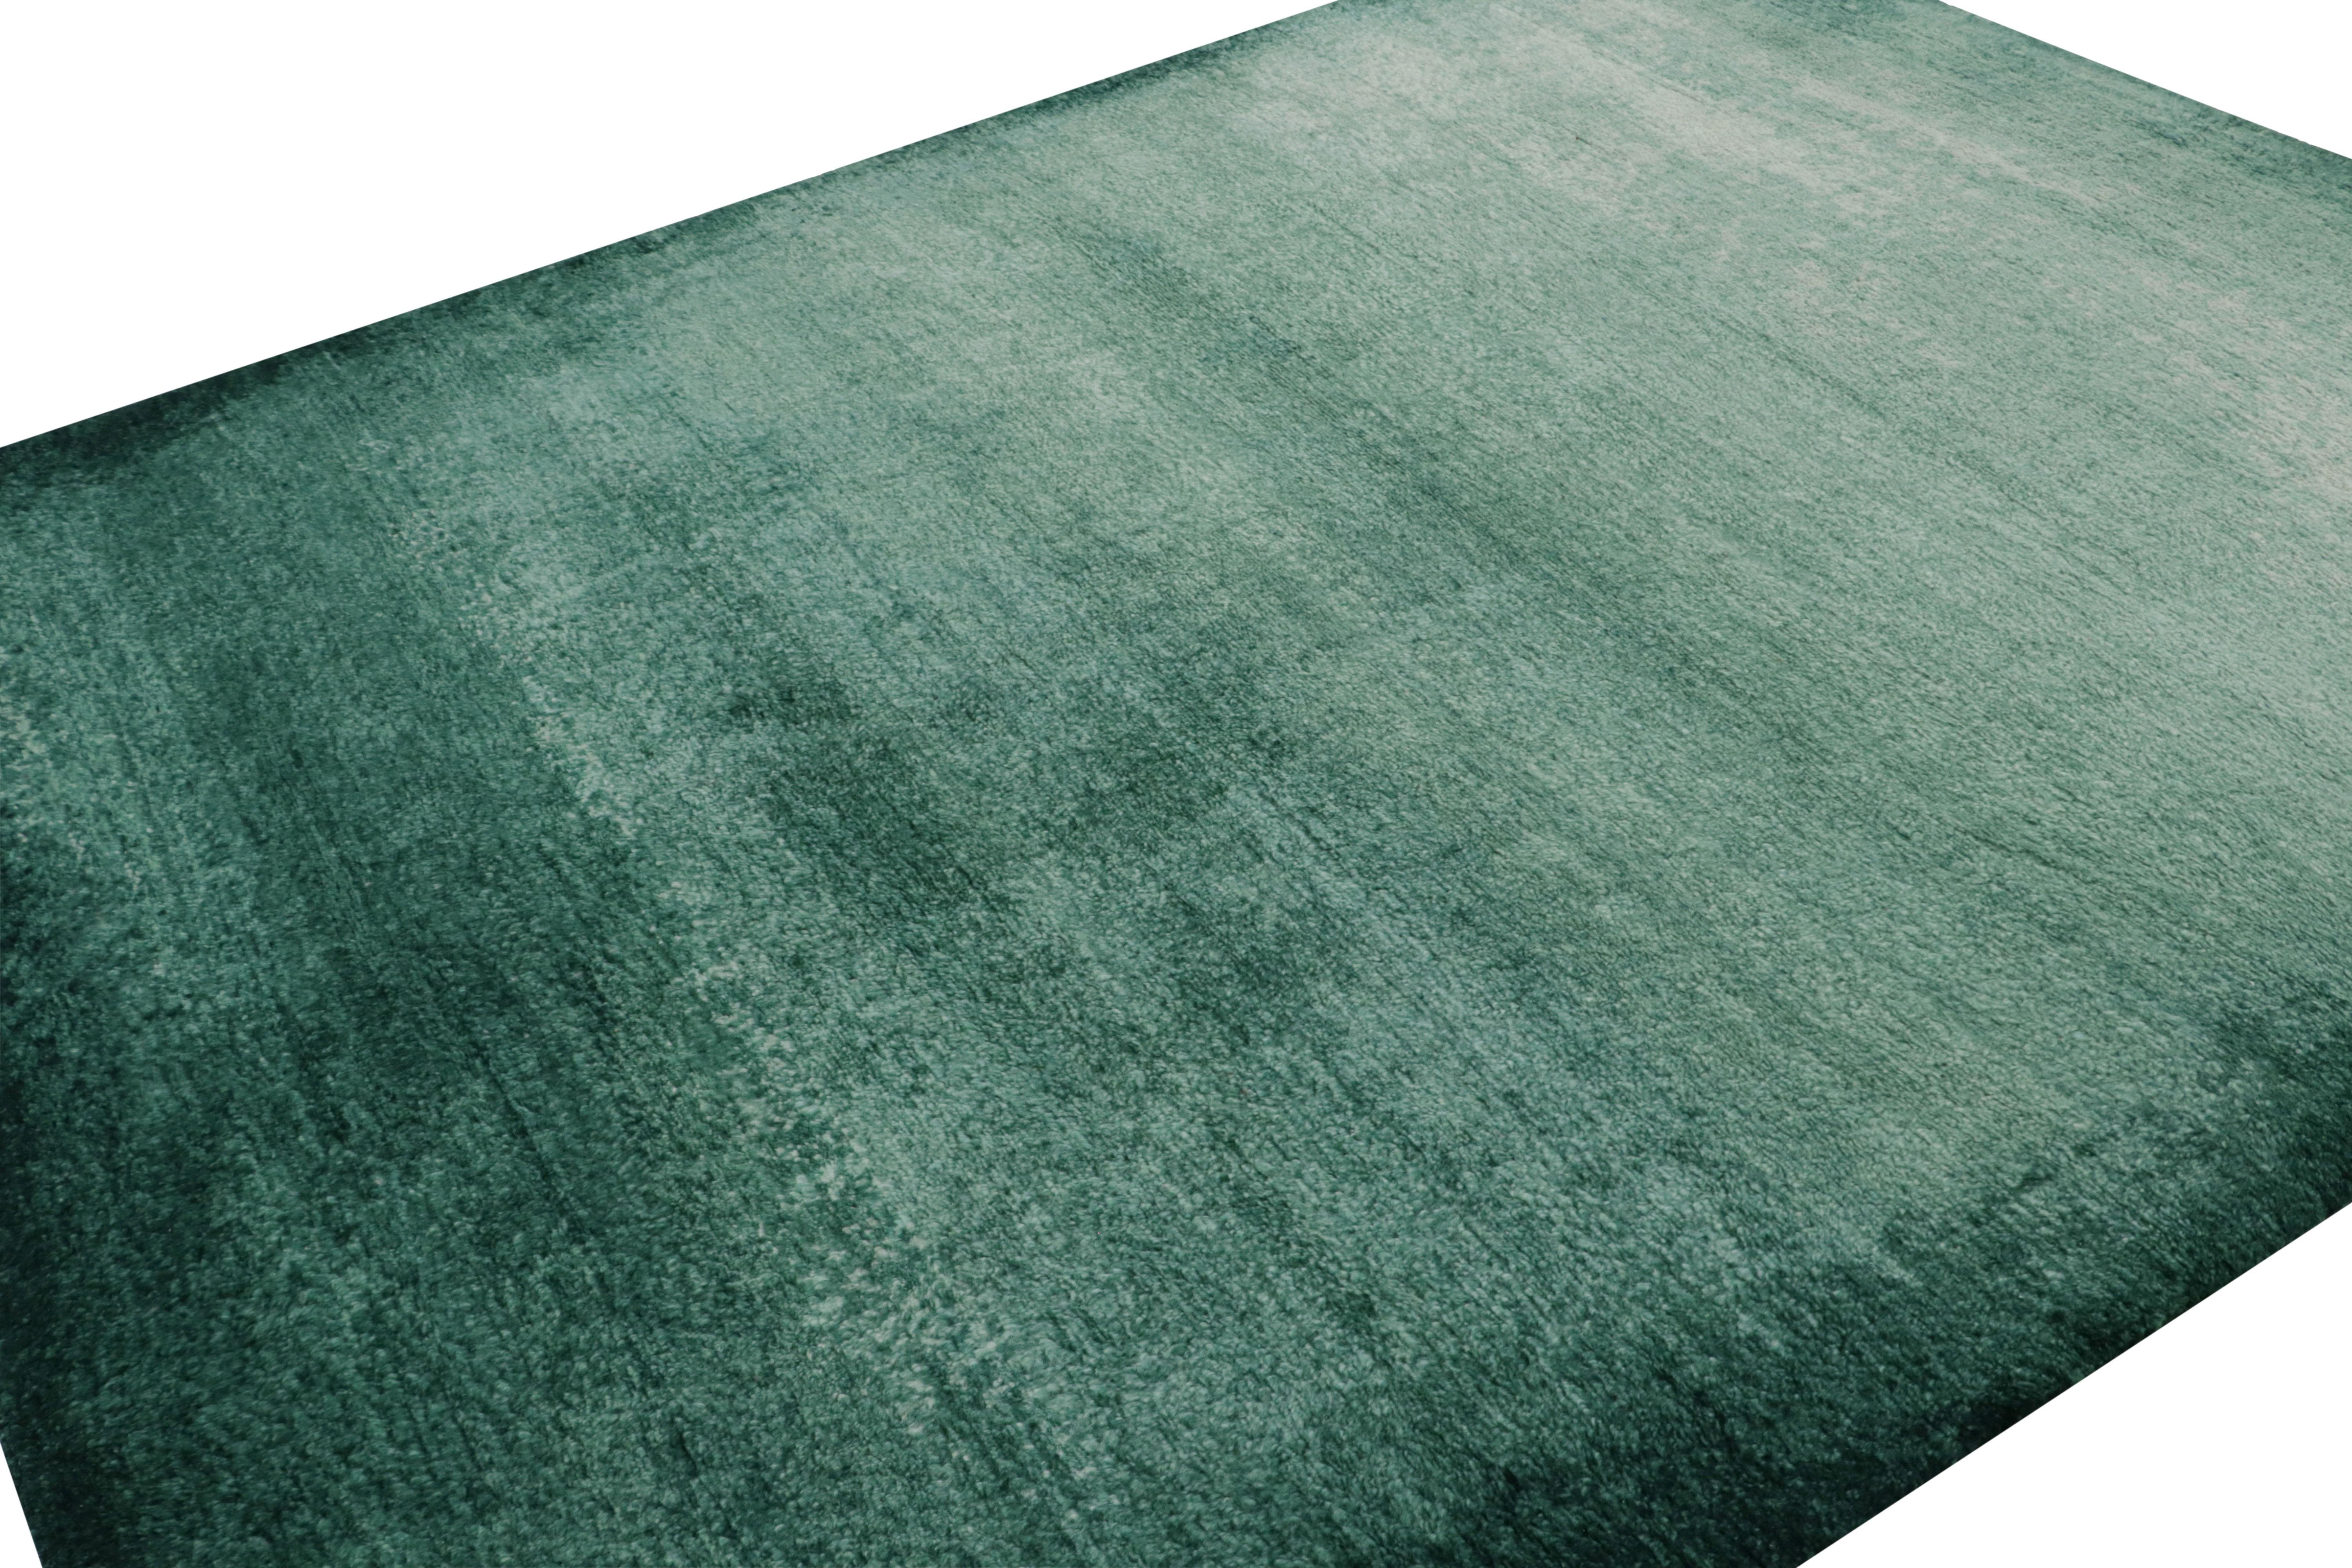 Hand-knotted in a luxurious pashmina, this 8x10 textural high-pile rug is a simple piece of neutrals and teal blue and green tones.

On the Design: 

Keen eyes will admire this neutral rug with a lush, high-pile texture that invites one to walk on